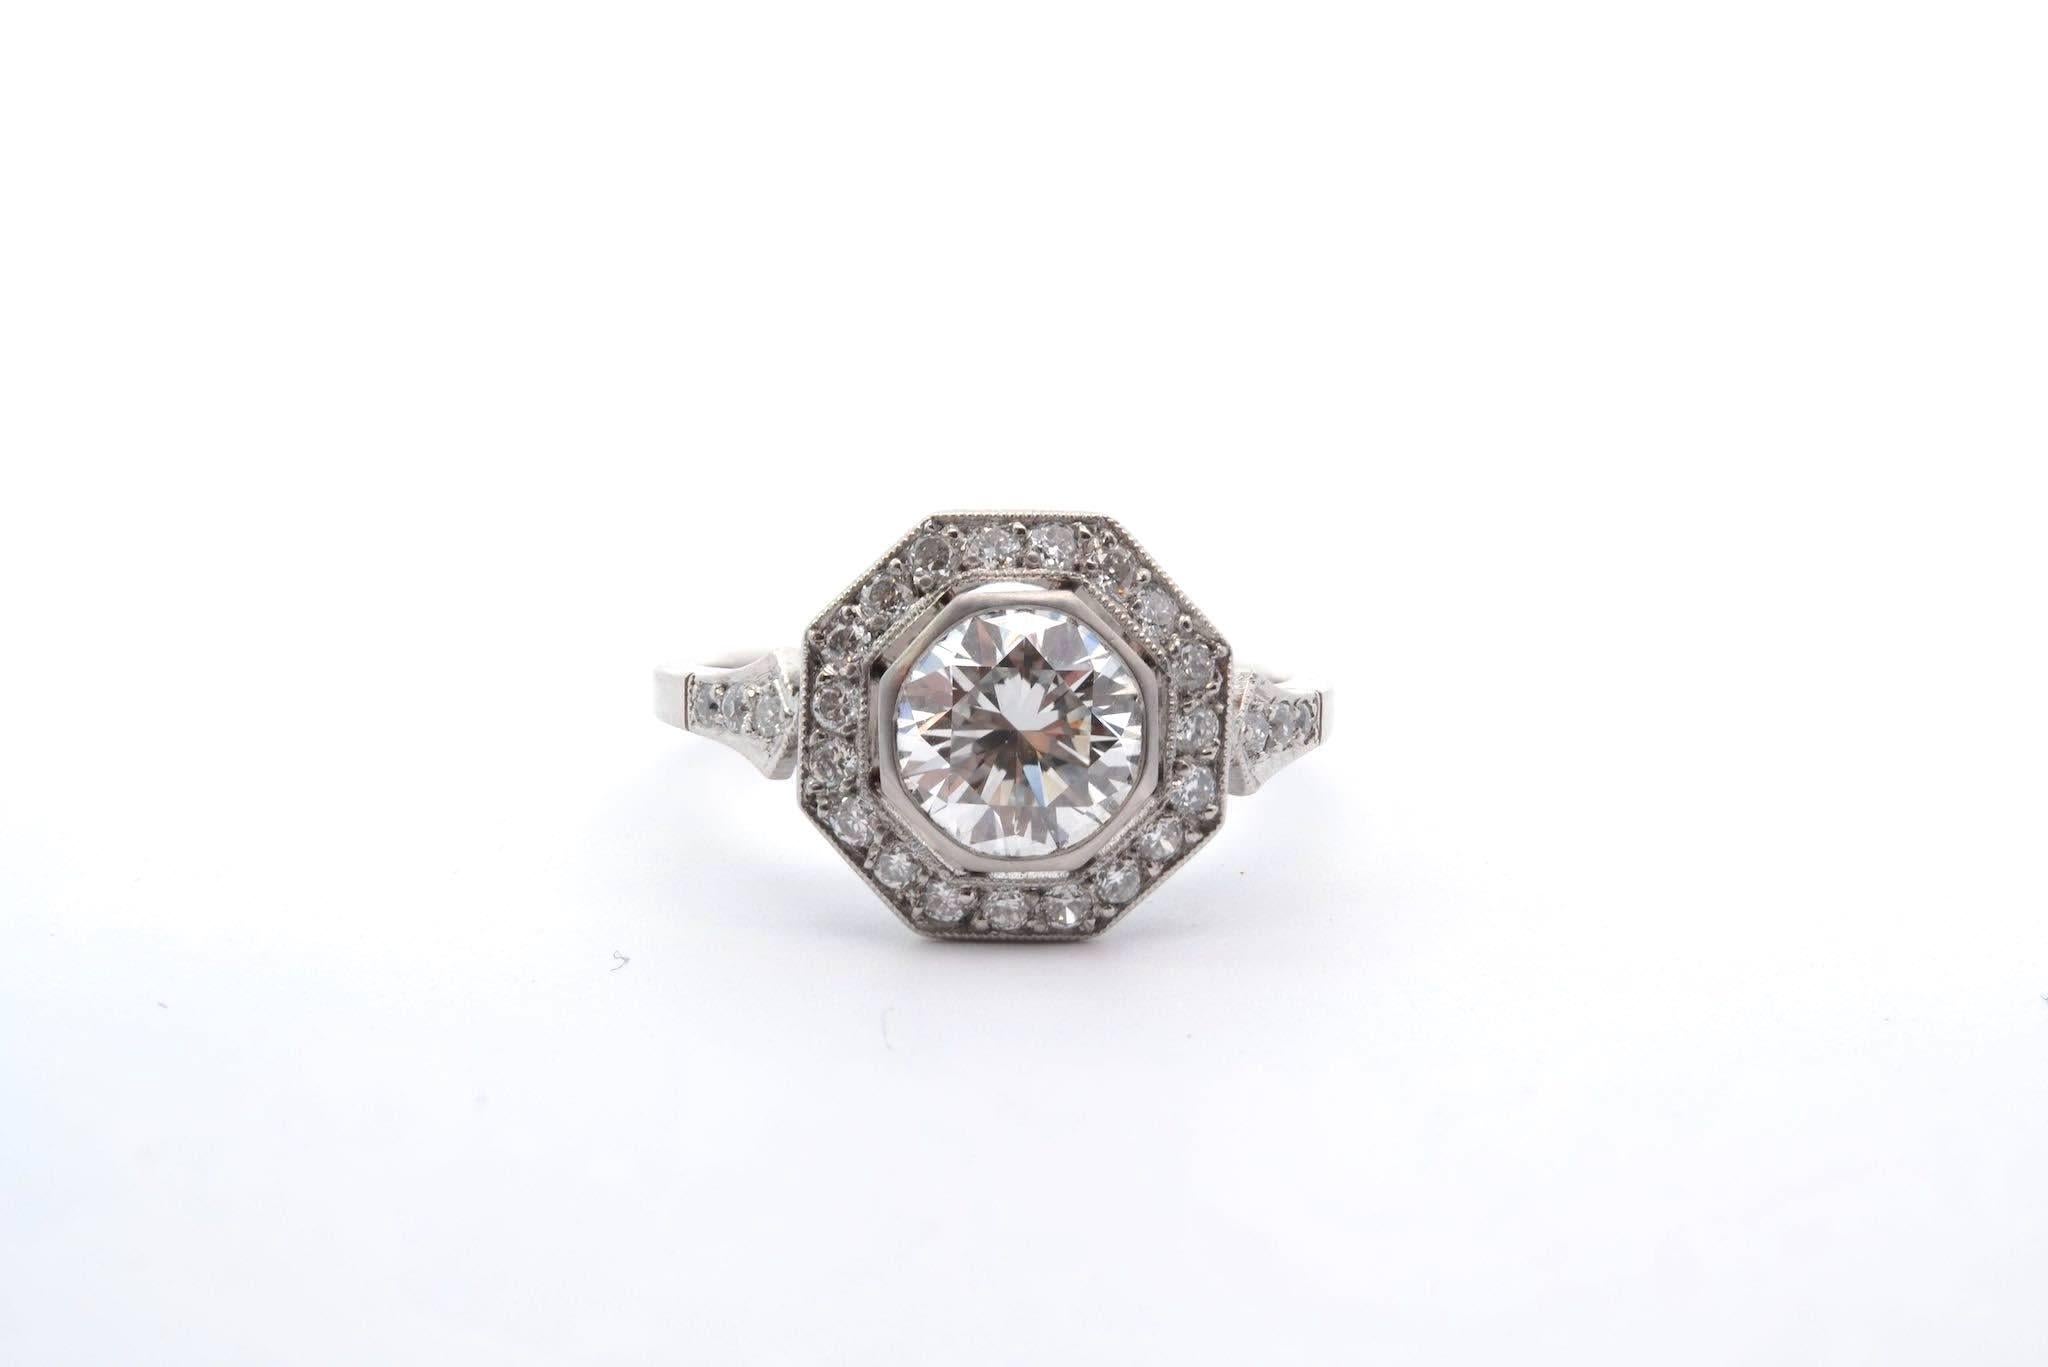 Stones: 1 diamond of 1.15cts I / SI1 and 25 diamonds: 0.35ct
Material: Platinum
Dimensions: 1.2cm
Weight: 4.3g
Period: Recent handmade Art Deco style
Size: 54 (free sizing)

Certificate
Ref. : 25137 25143